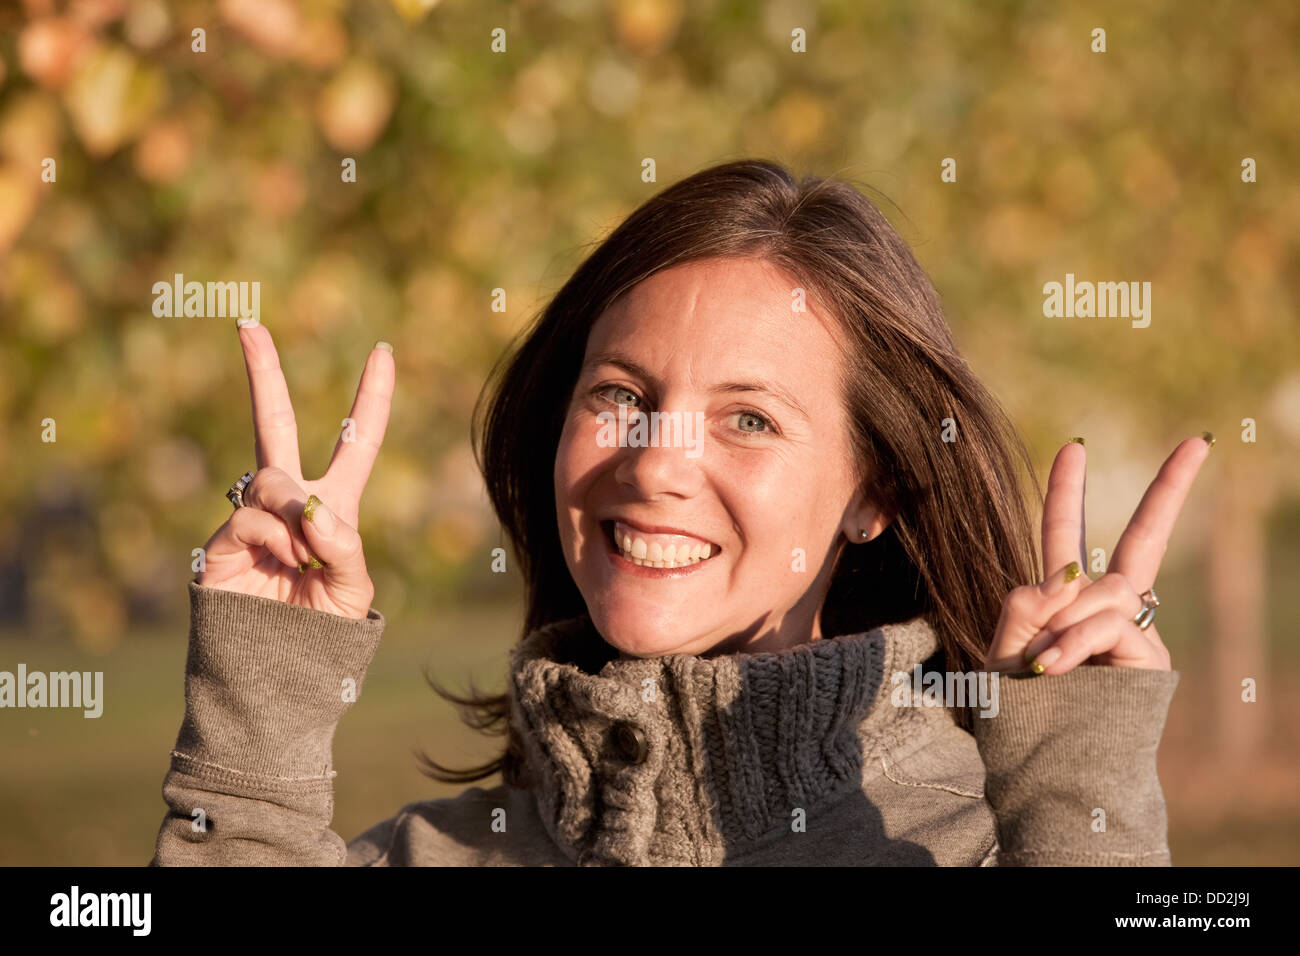 A Woman Giving A The Peace Symbol In A Park In Autumn; Beaumont, Alberta, Canada Stock Photo